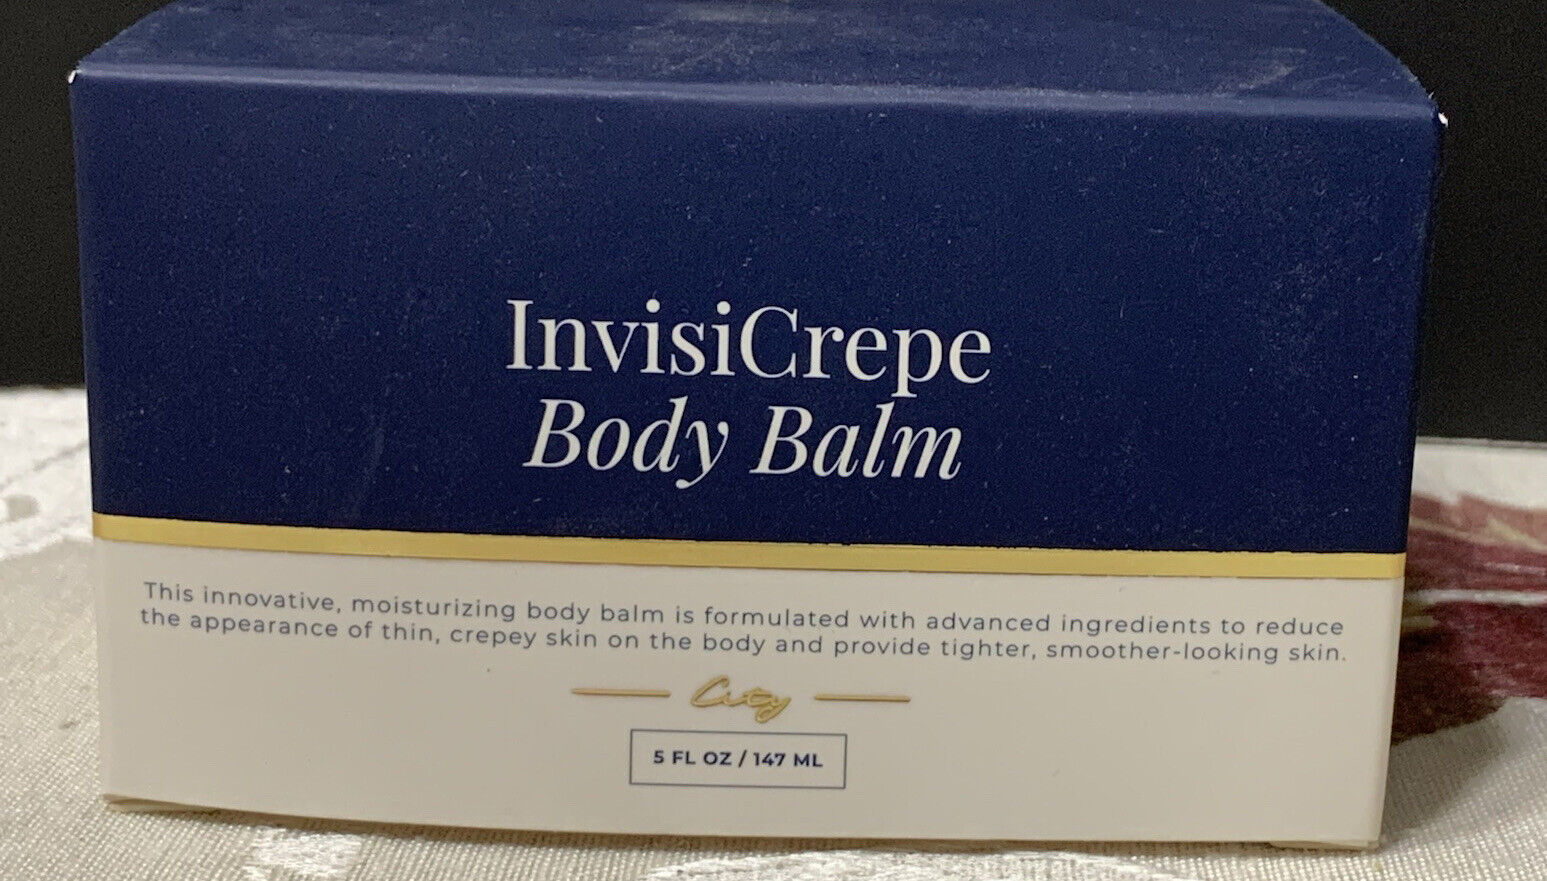 City Beauty InvisiCrepe Smoothing and Firming Cash special price Balm Body Challenge the lowest price 5 fl oz